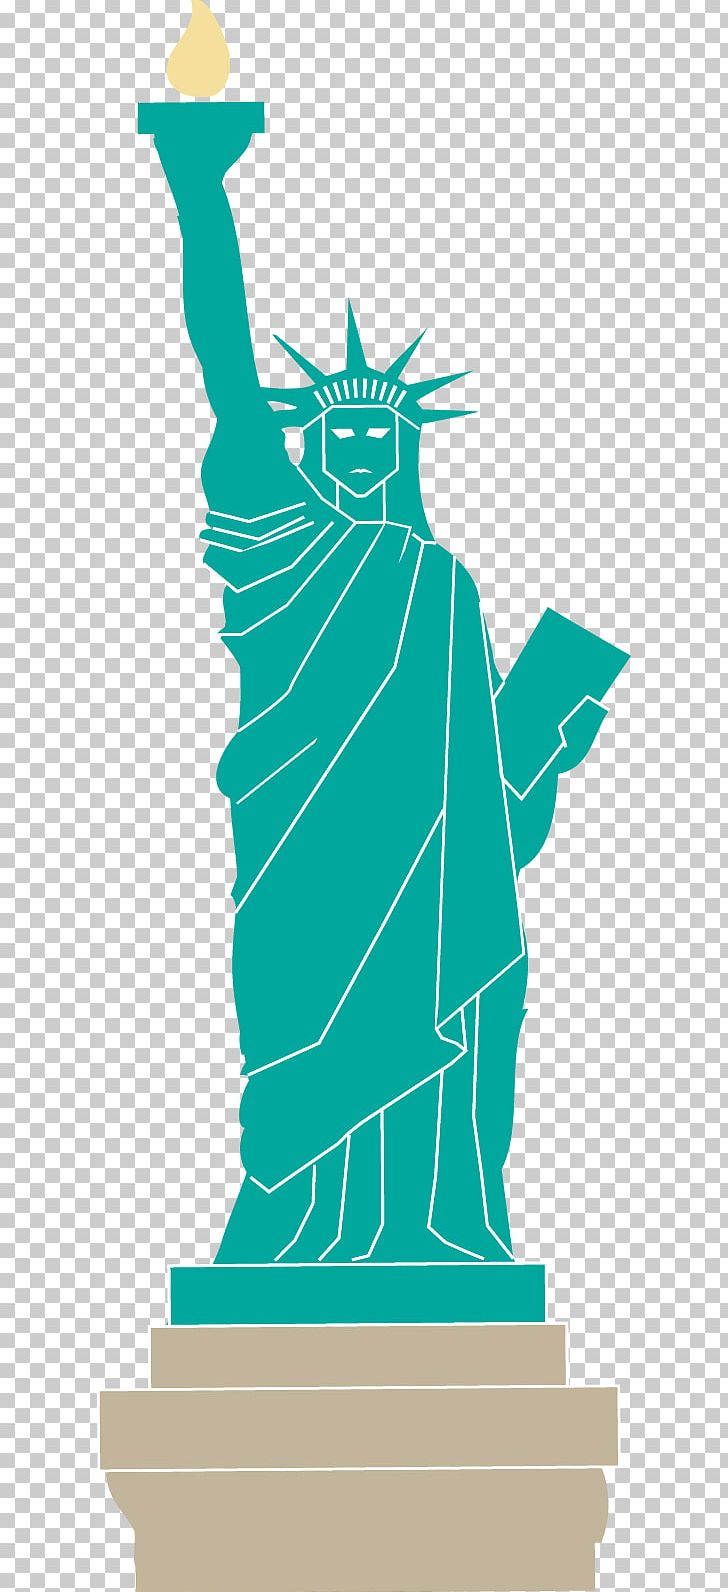 Statue Of Liberty Computer File PNG, Clipart, Art, Buddha Statue, Download, Encapsulated Postscript, Euclidean Vector Free PNG Download